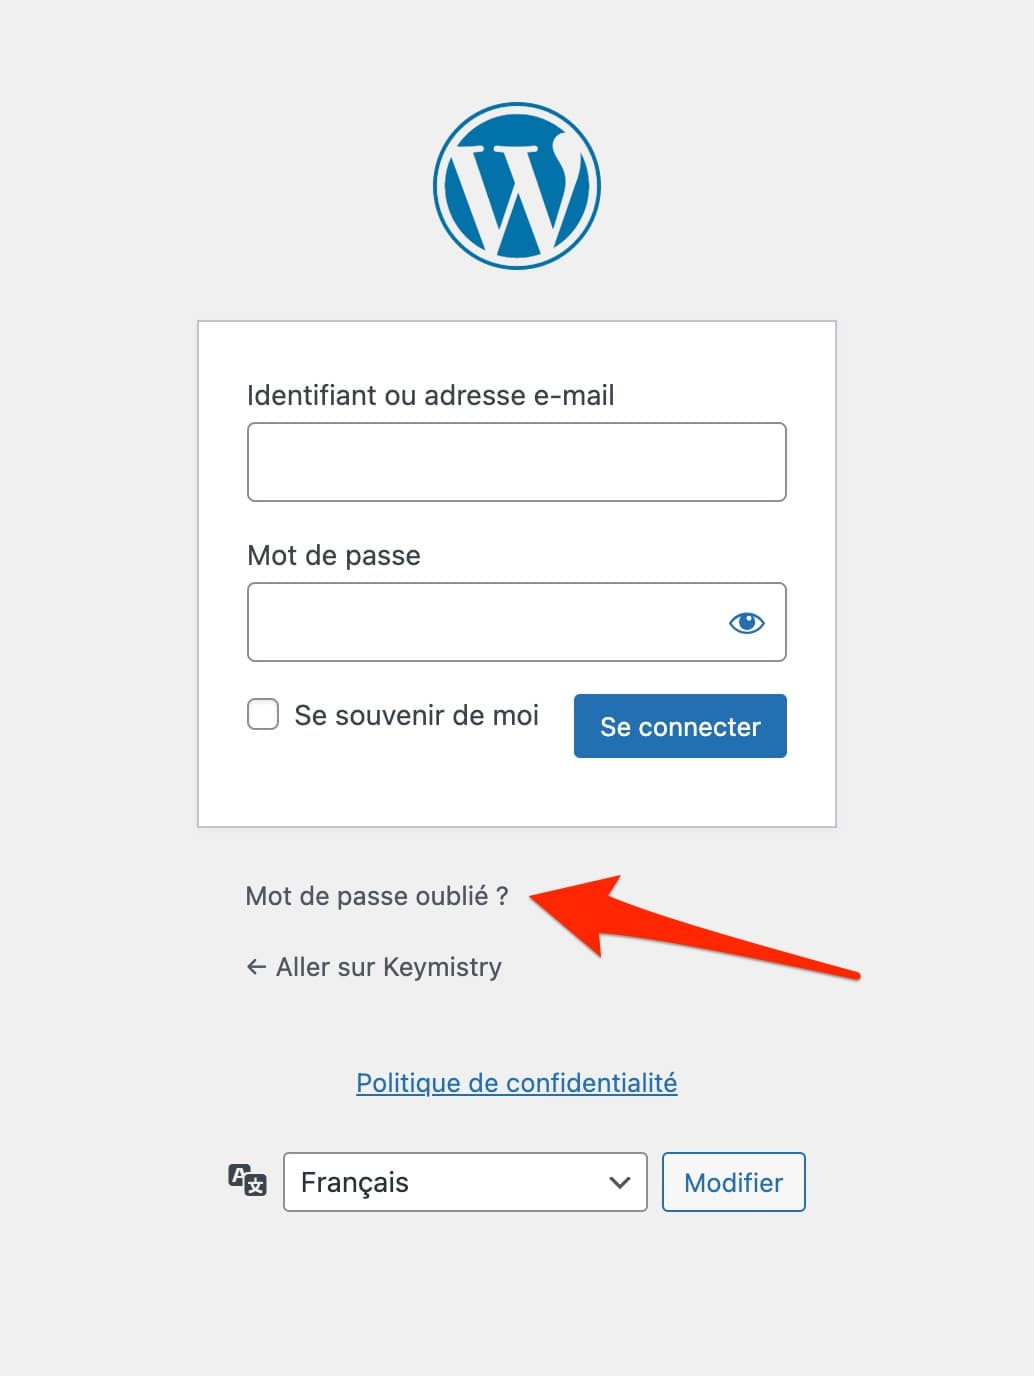 A link when the password is forgotten on WordPress.